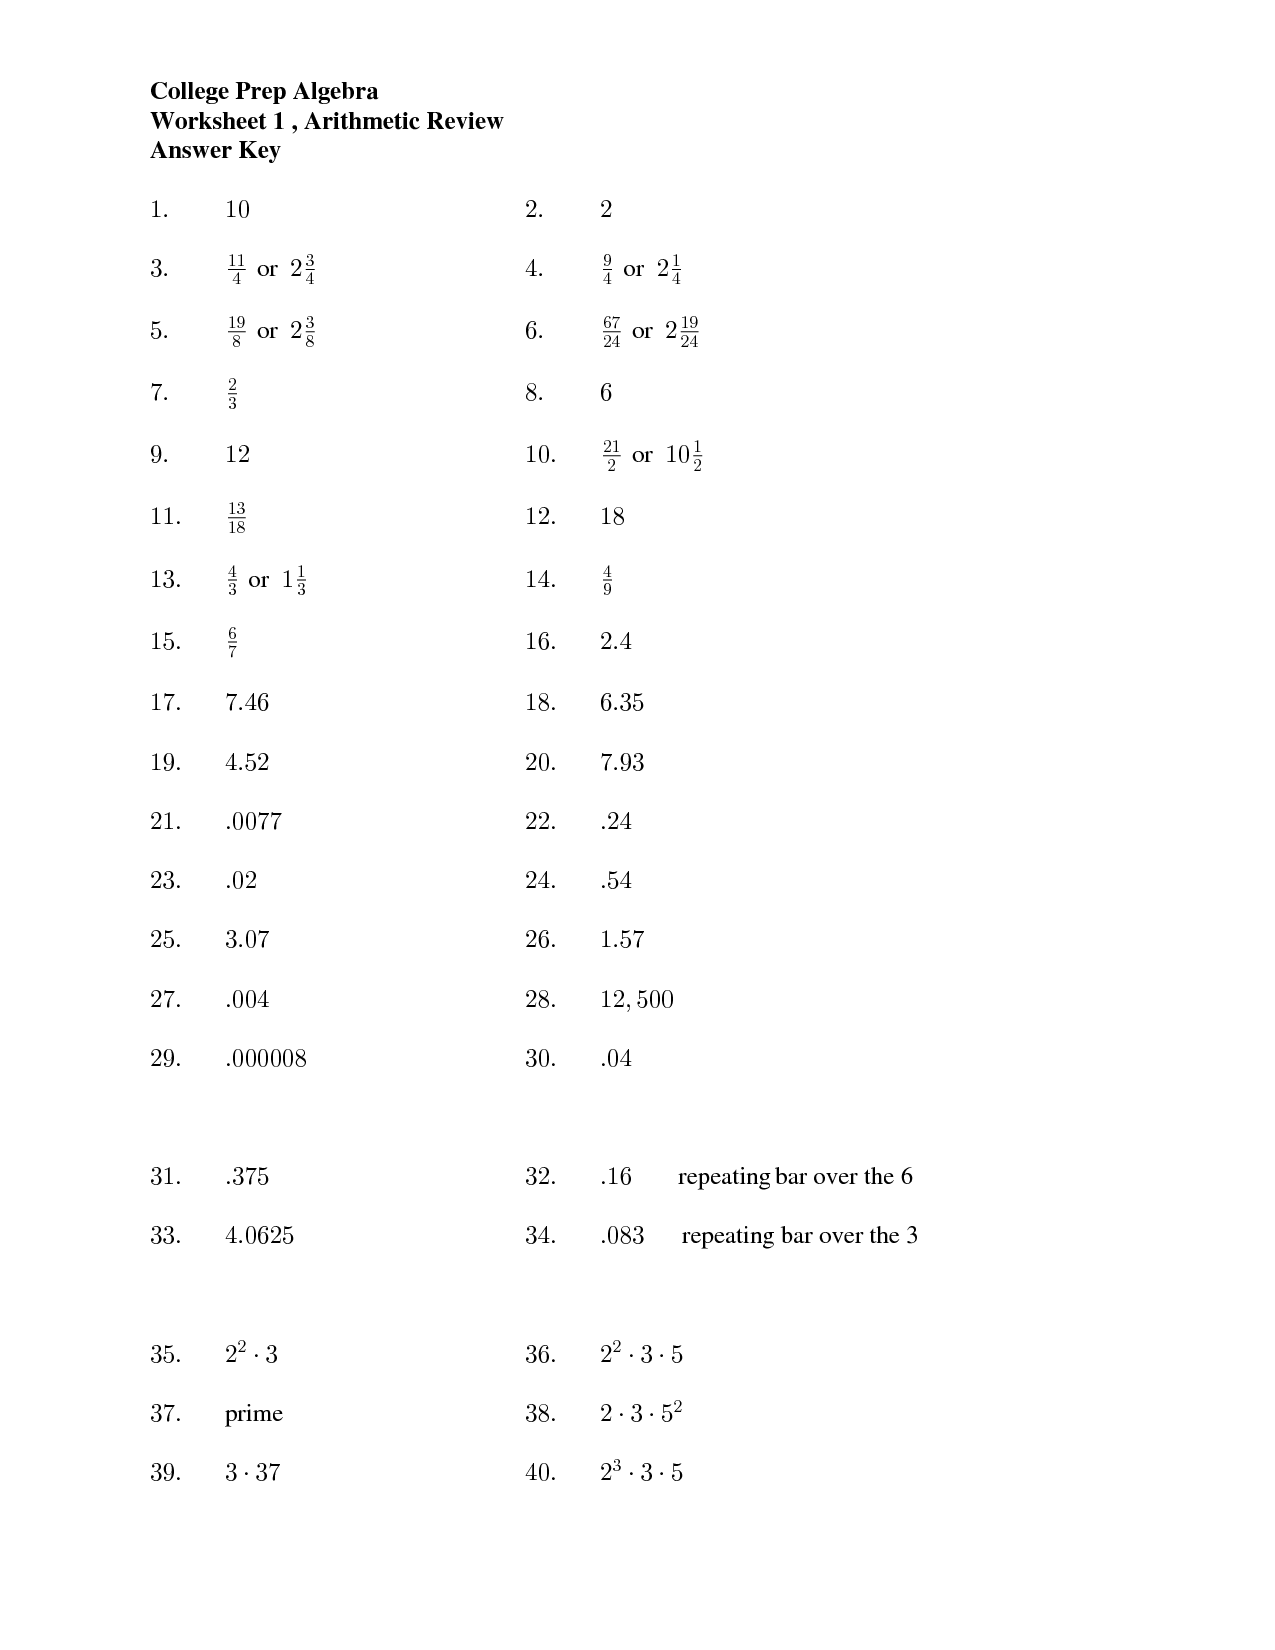 College Algebra Worksheets with Answers